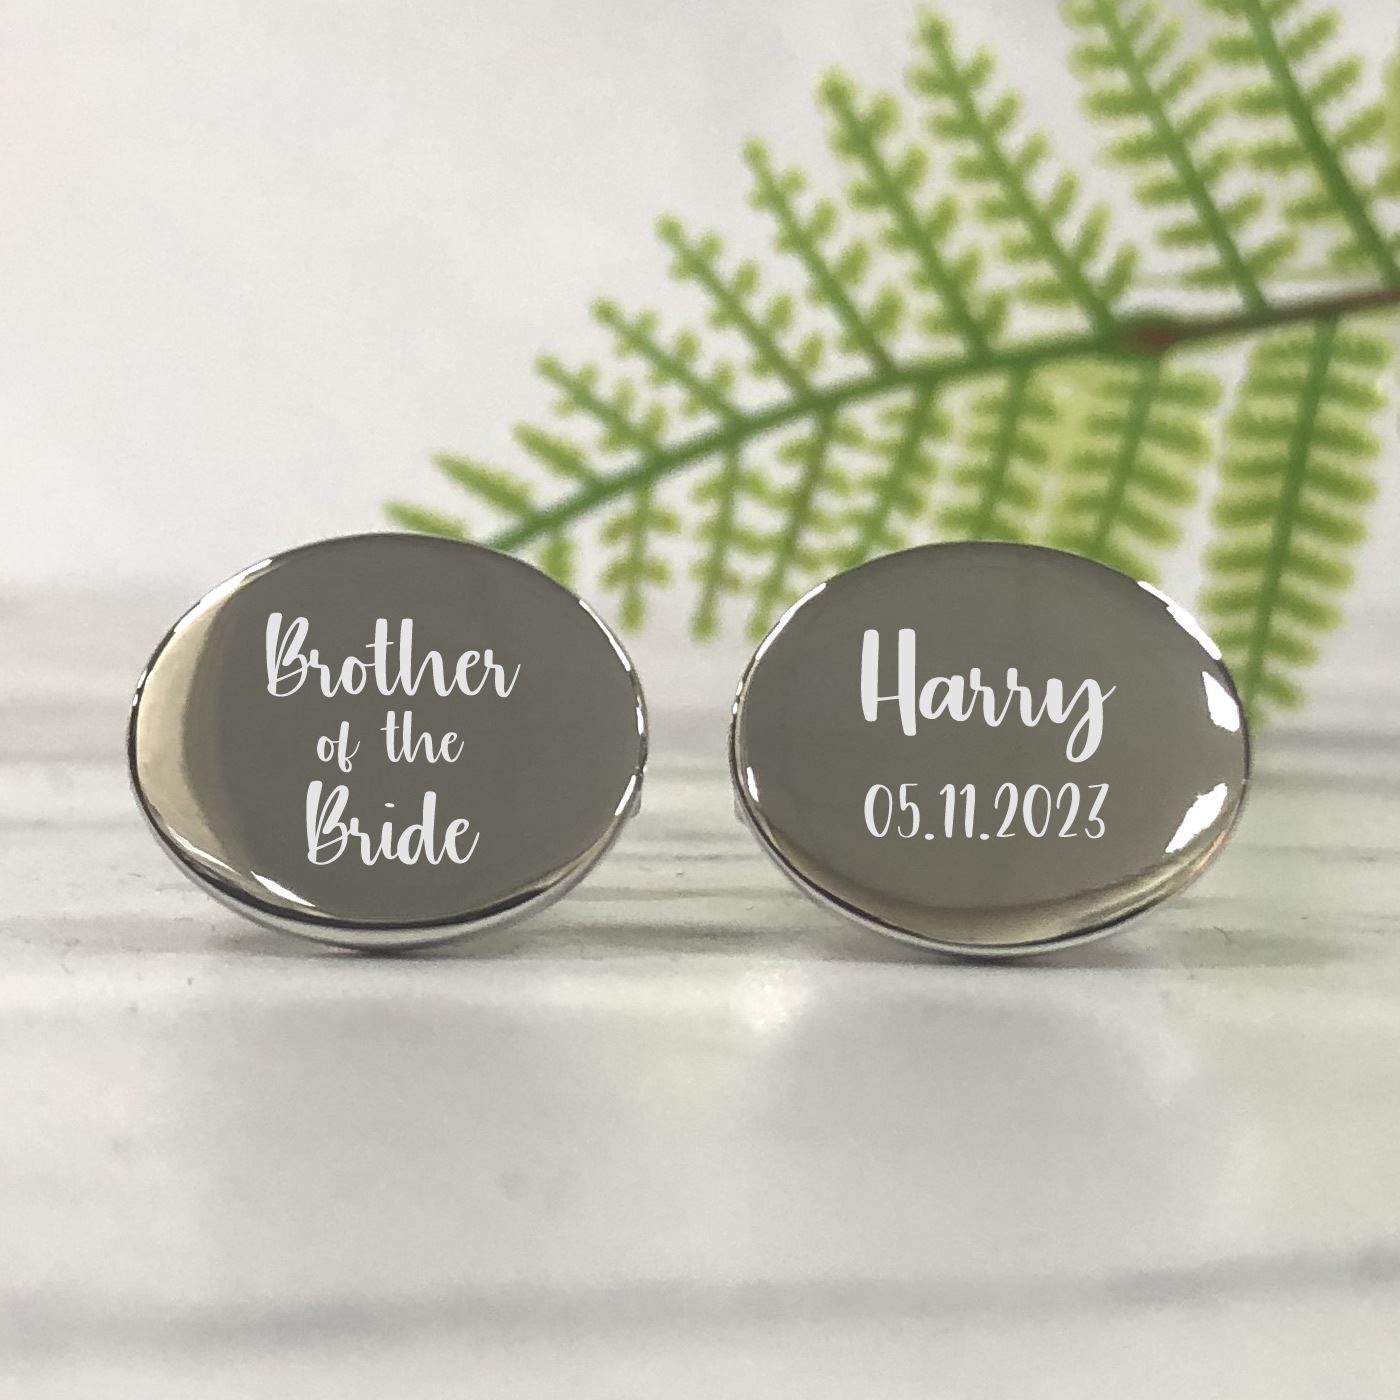 Engraved Wedding Day Oval Cufflinks - Brother of the Bride